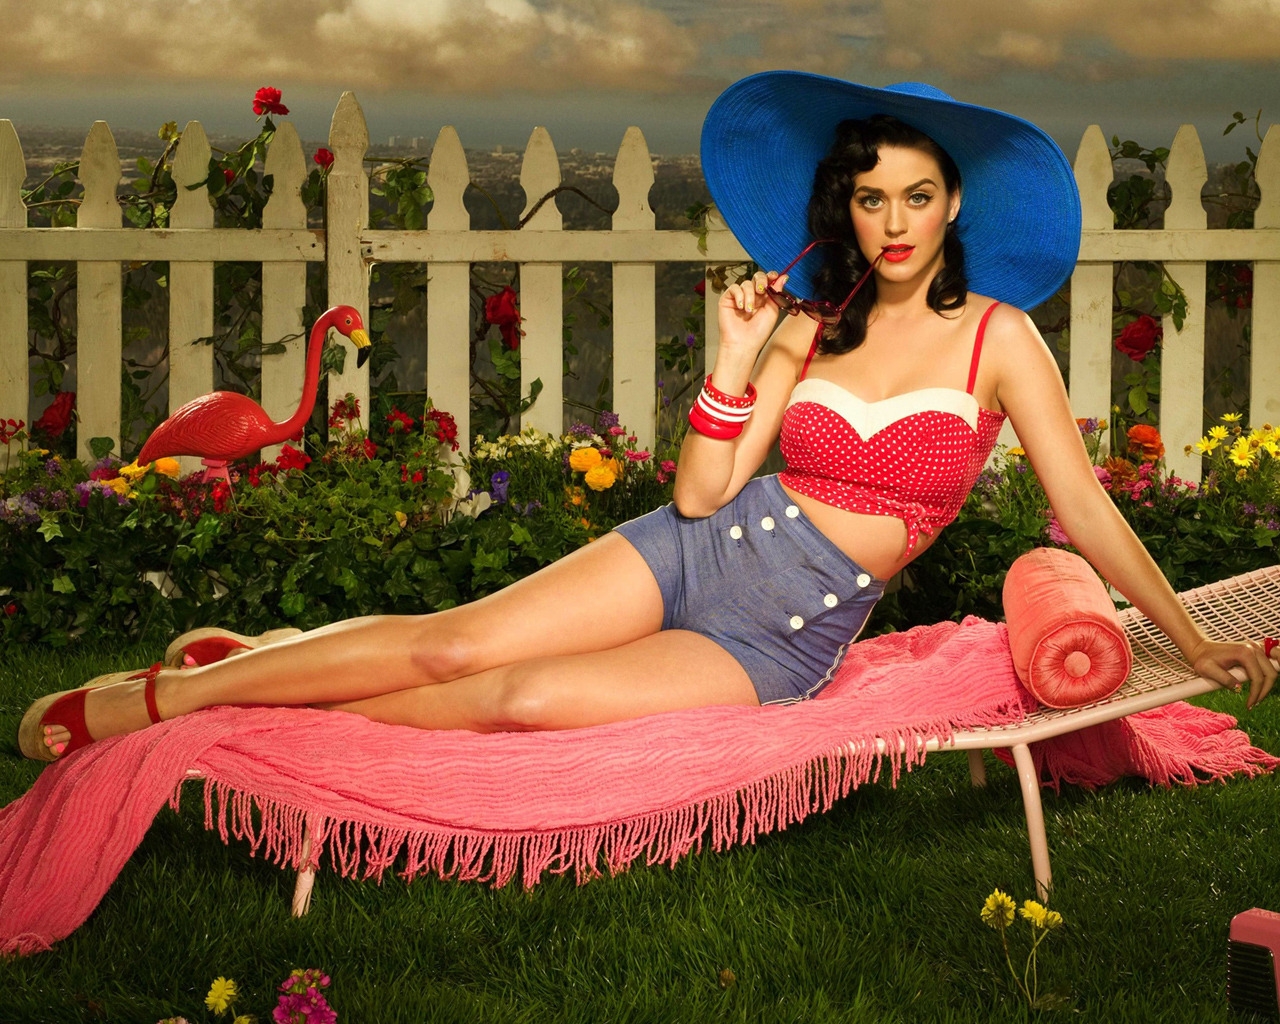 Katy Perry on The Chair for 1280 x 1024 resolution